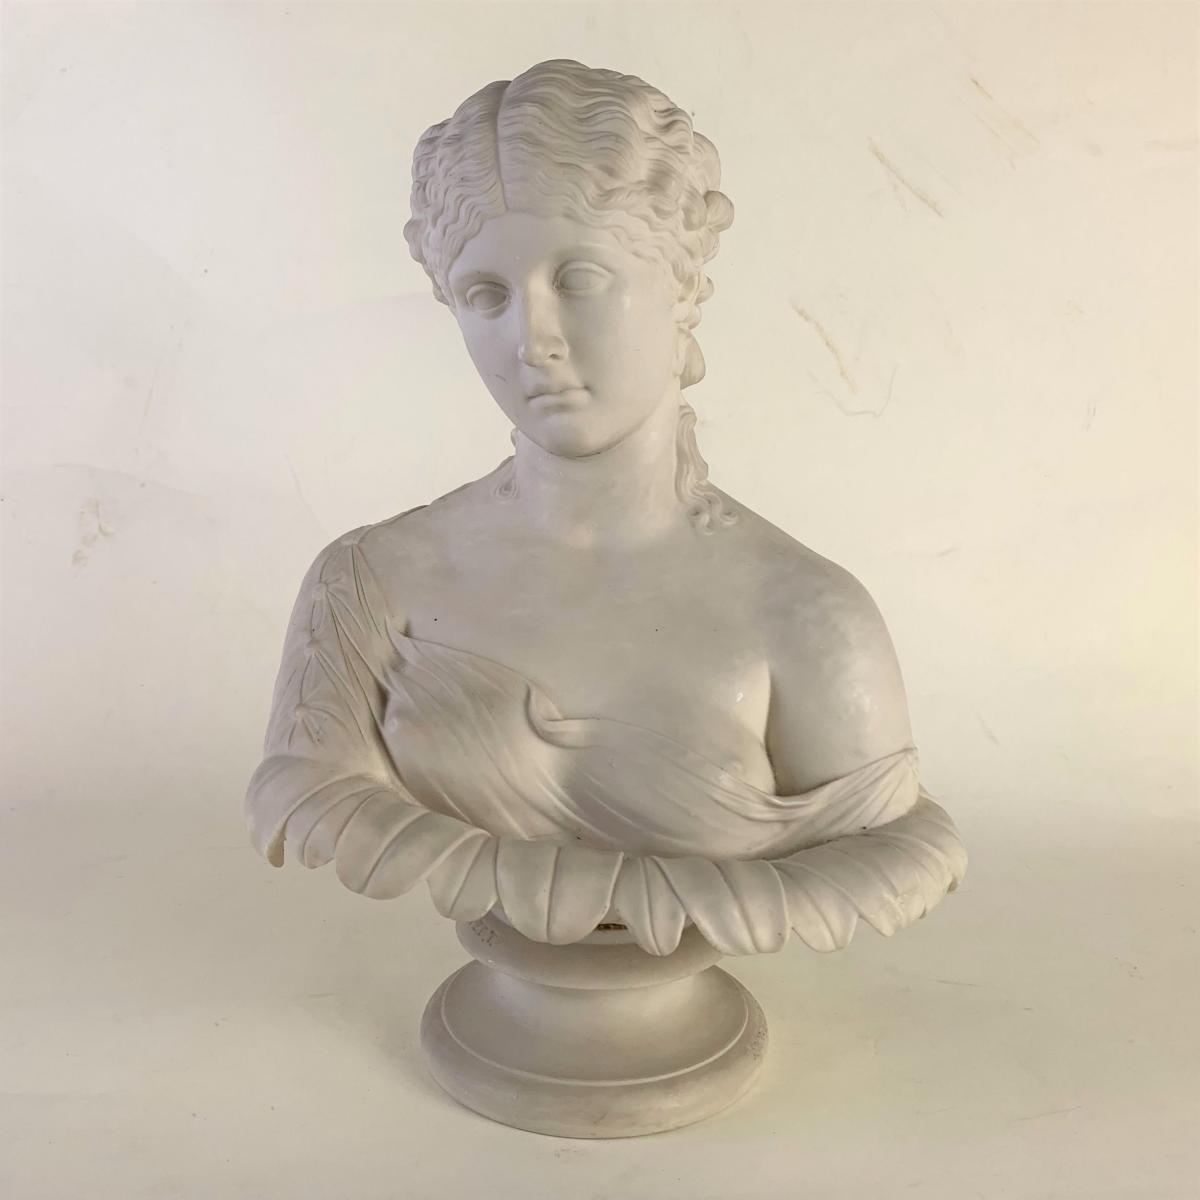 Parian Ware Bust Titled Clytie, Sculpted by C. Delpech